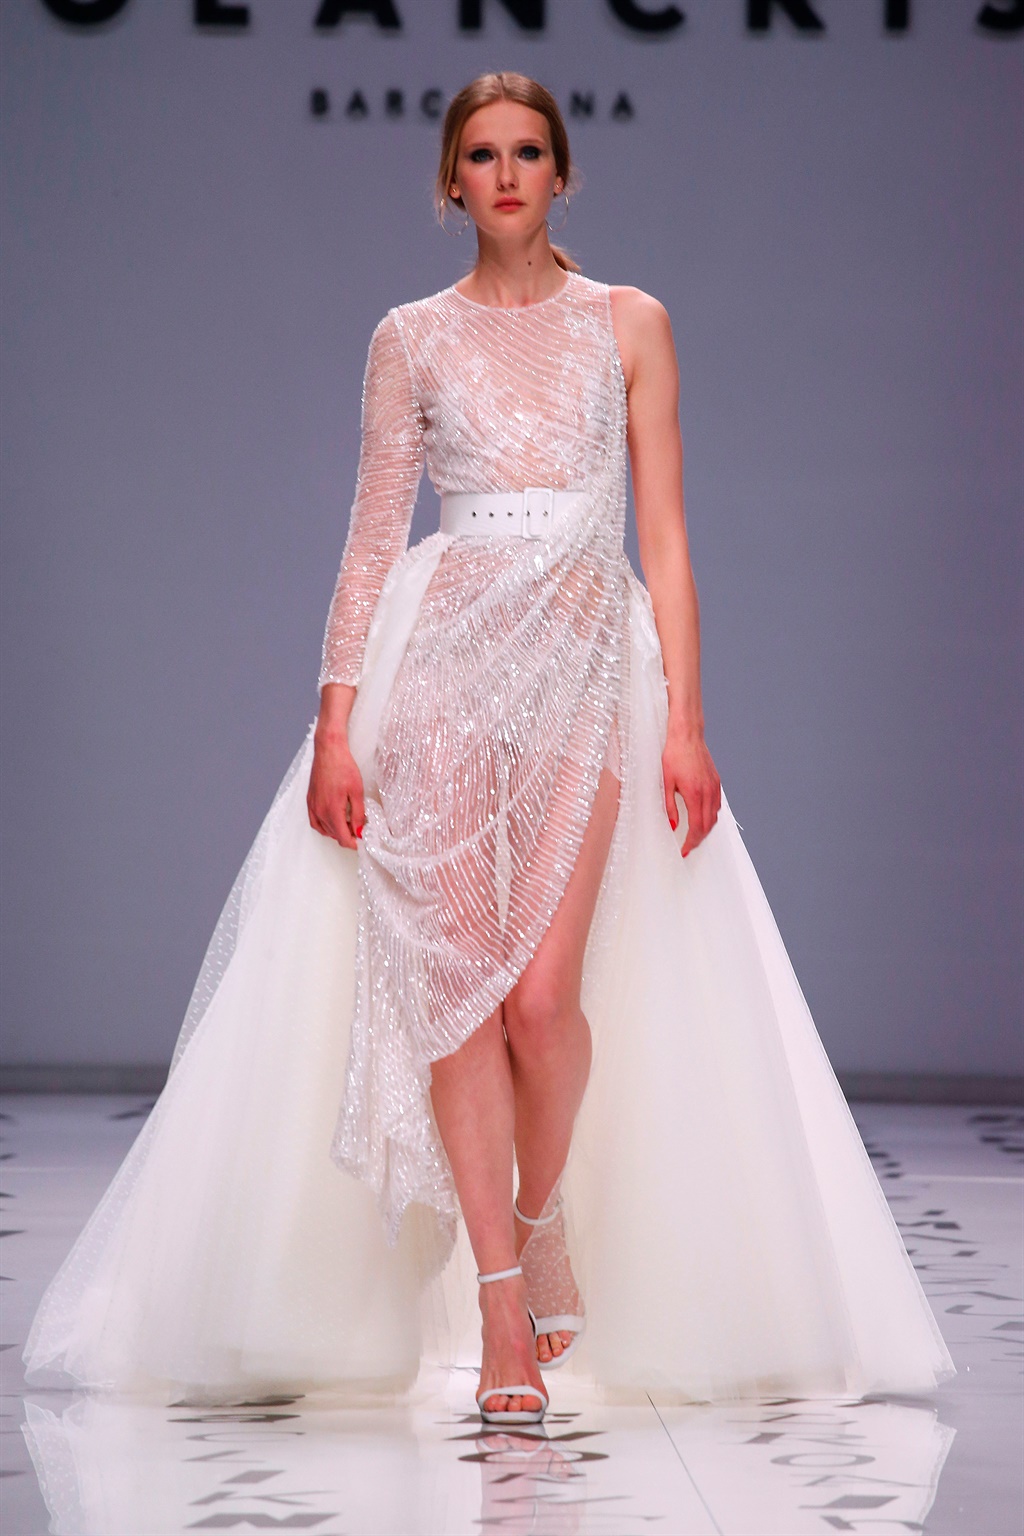 Here are 10 nude wedding dresses straight form the